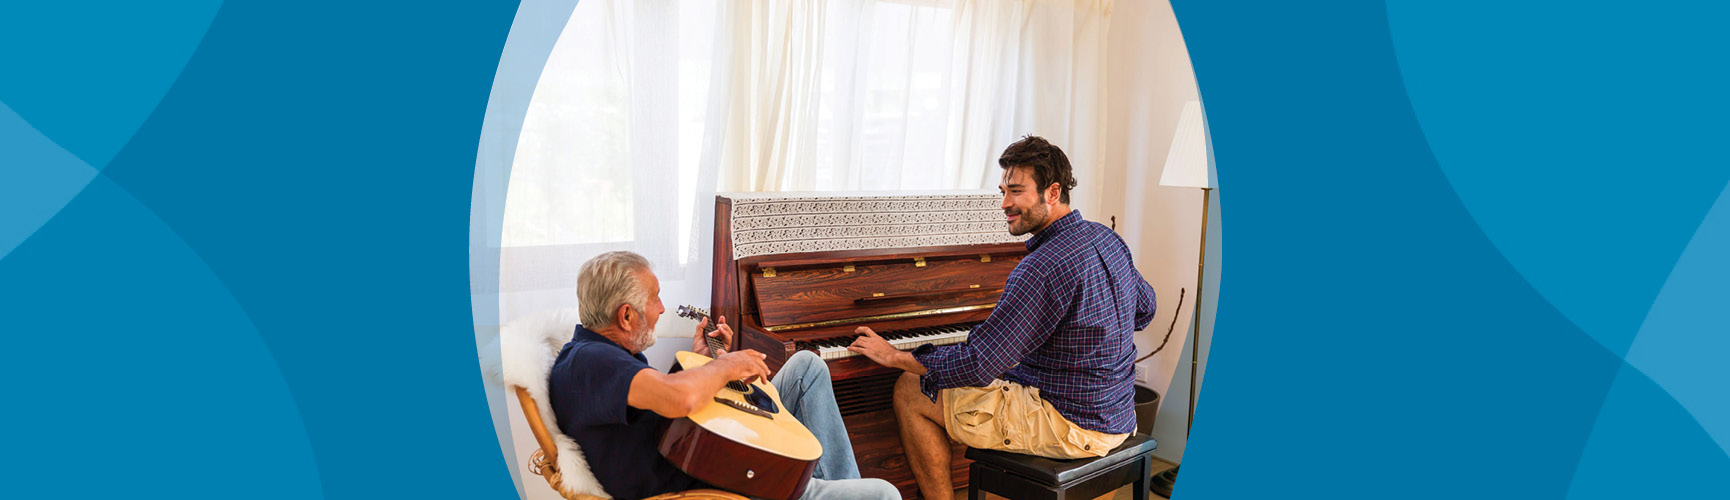 Older man, seated, plays guitar alongside younger man playing piano. Both look happy.